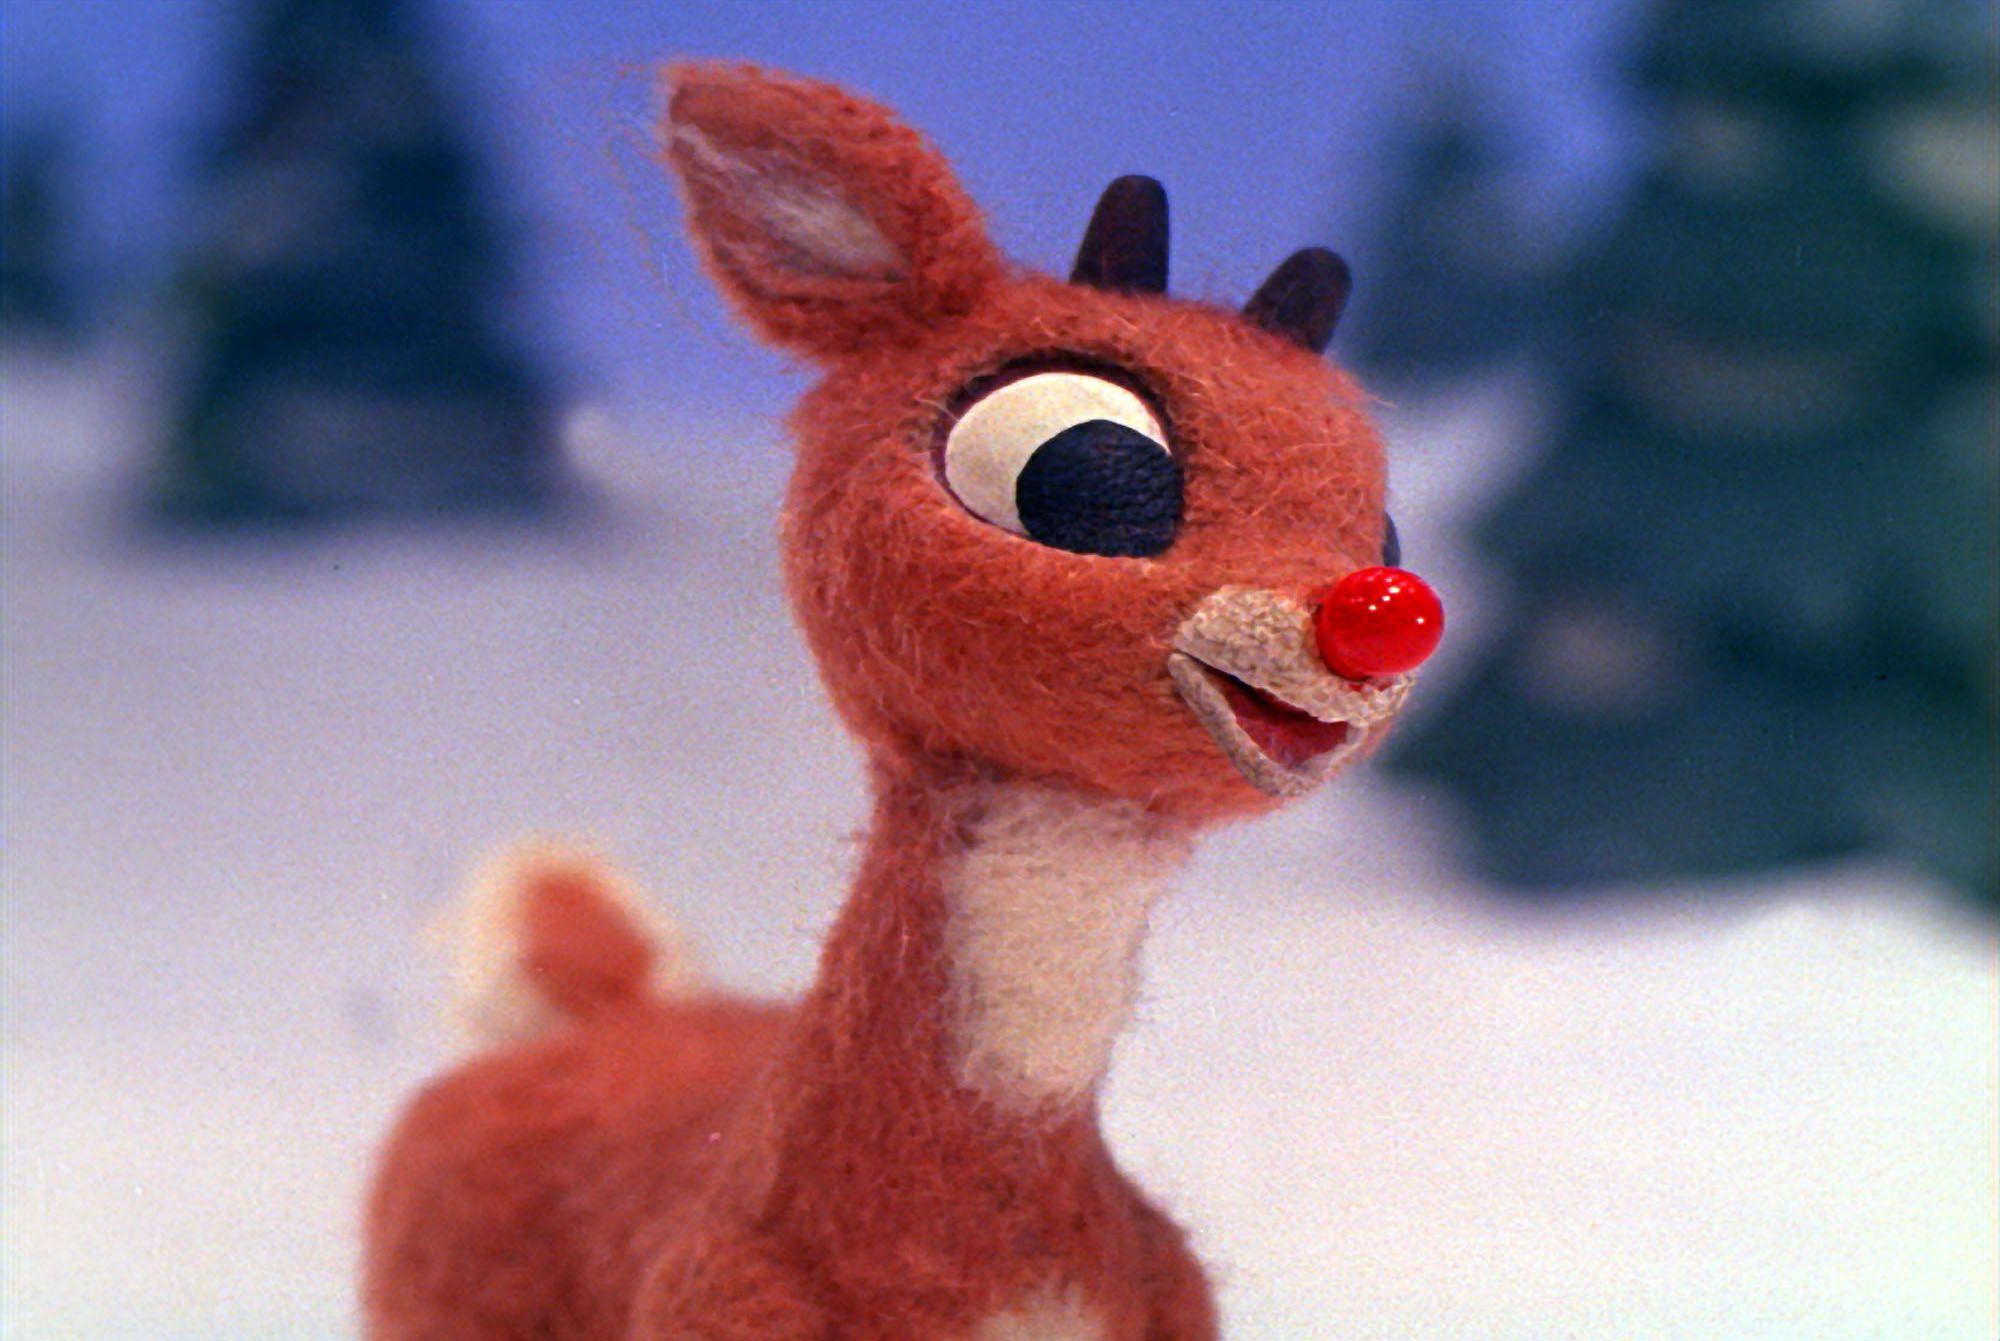 a cute rudolph wallpaper for the holidays feel free to use if you want   rAdoptMeRBX